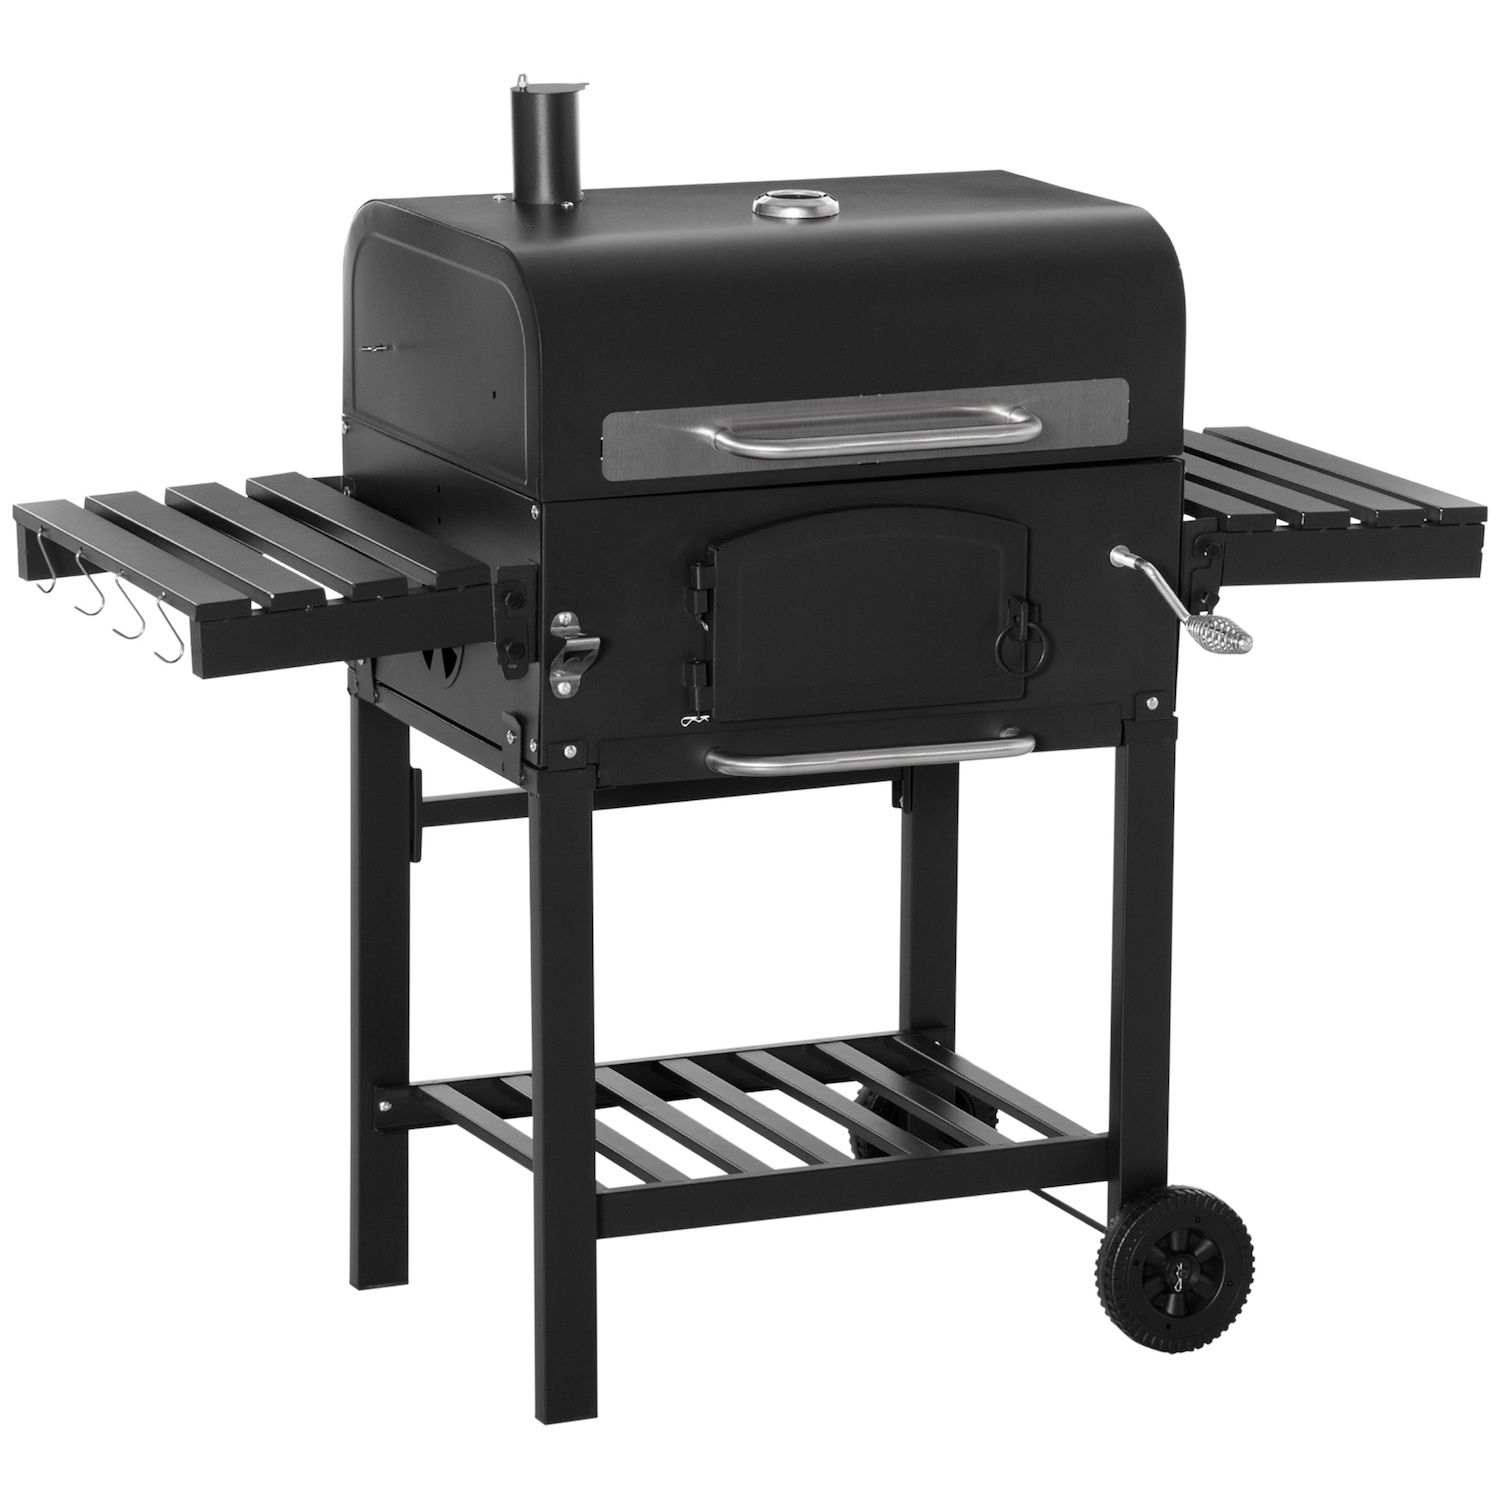 Costway 1600w Electric Bbq Grill With Warming Rack, Temperature